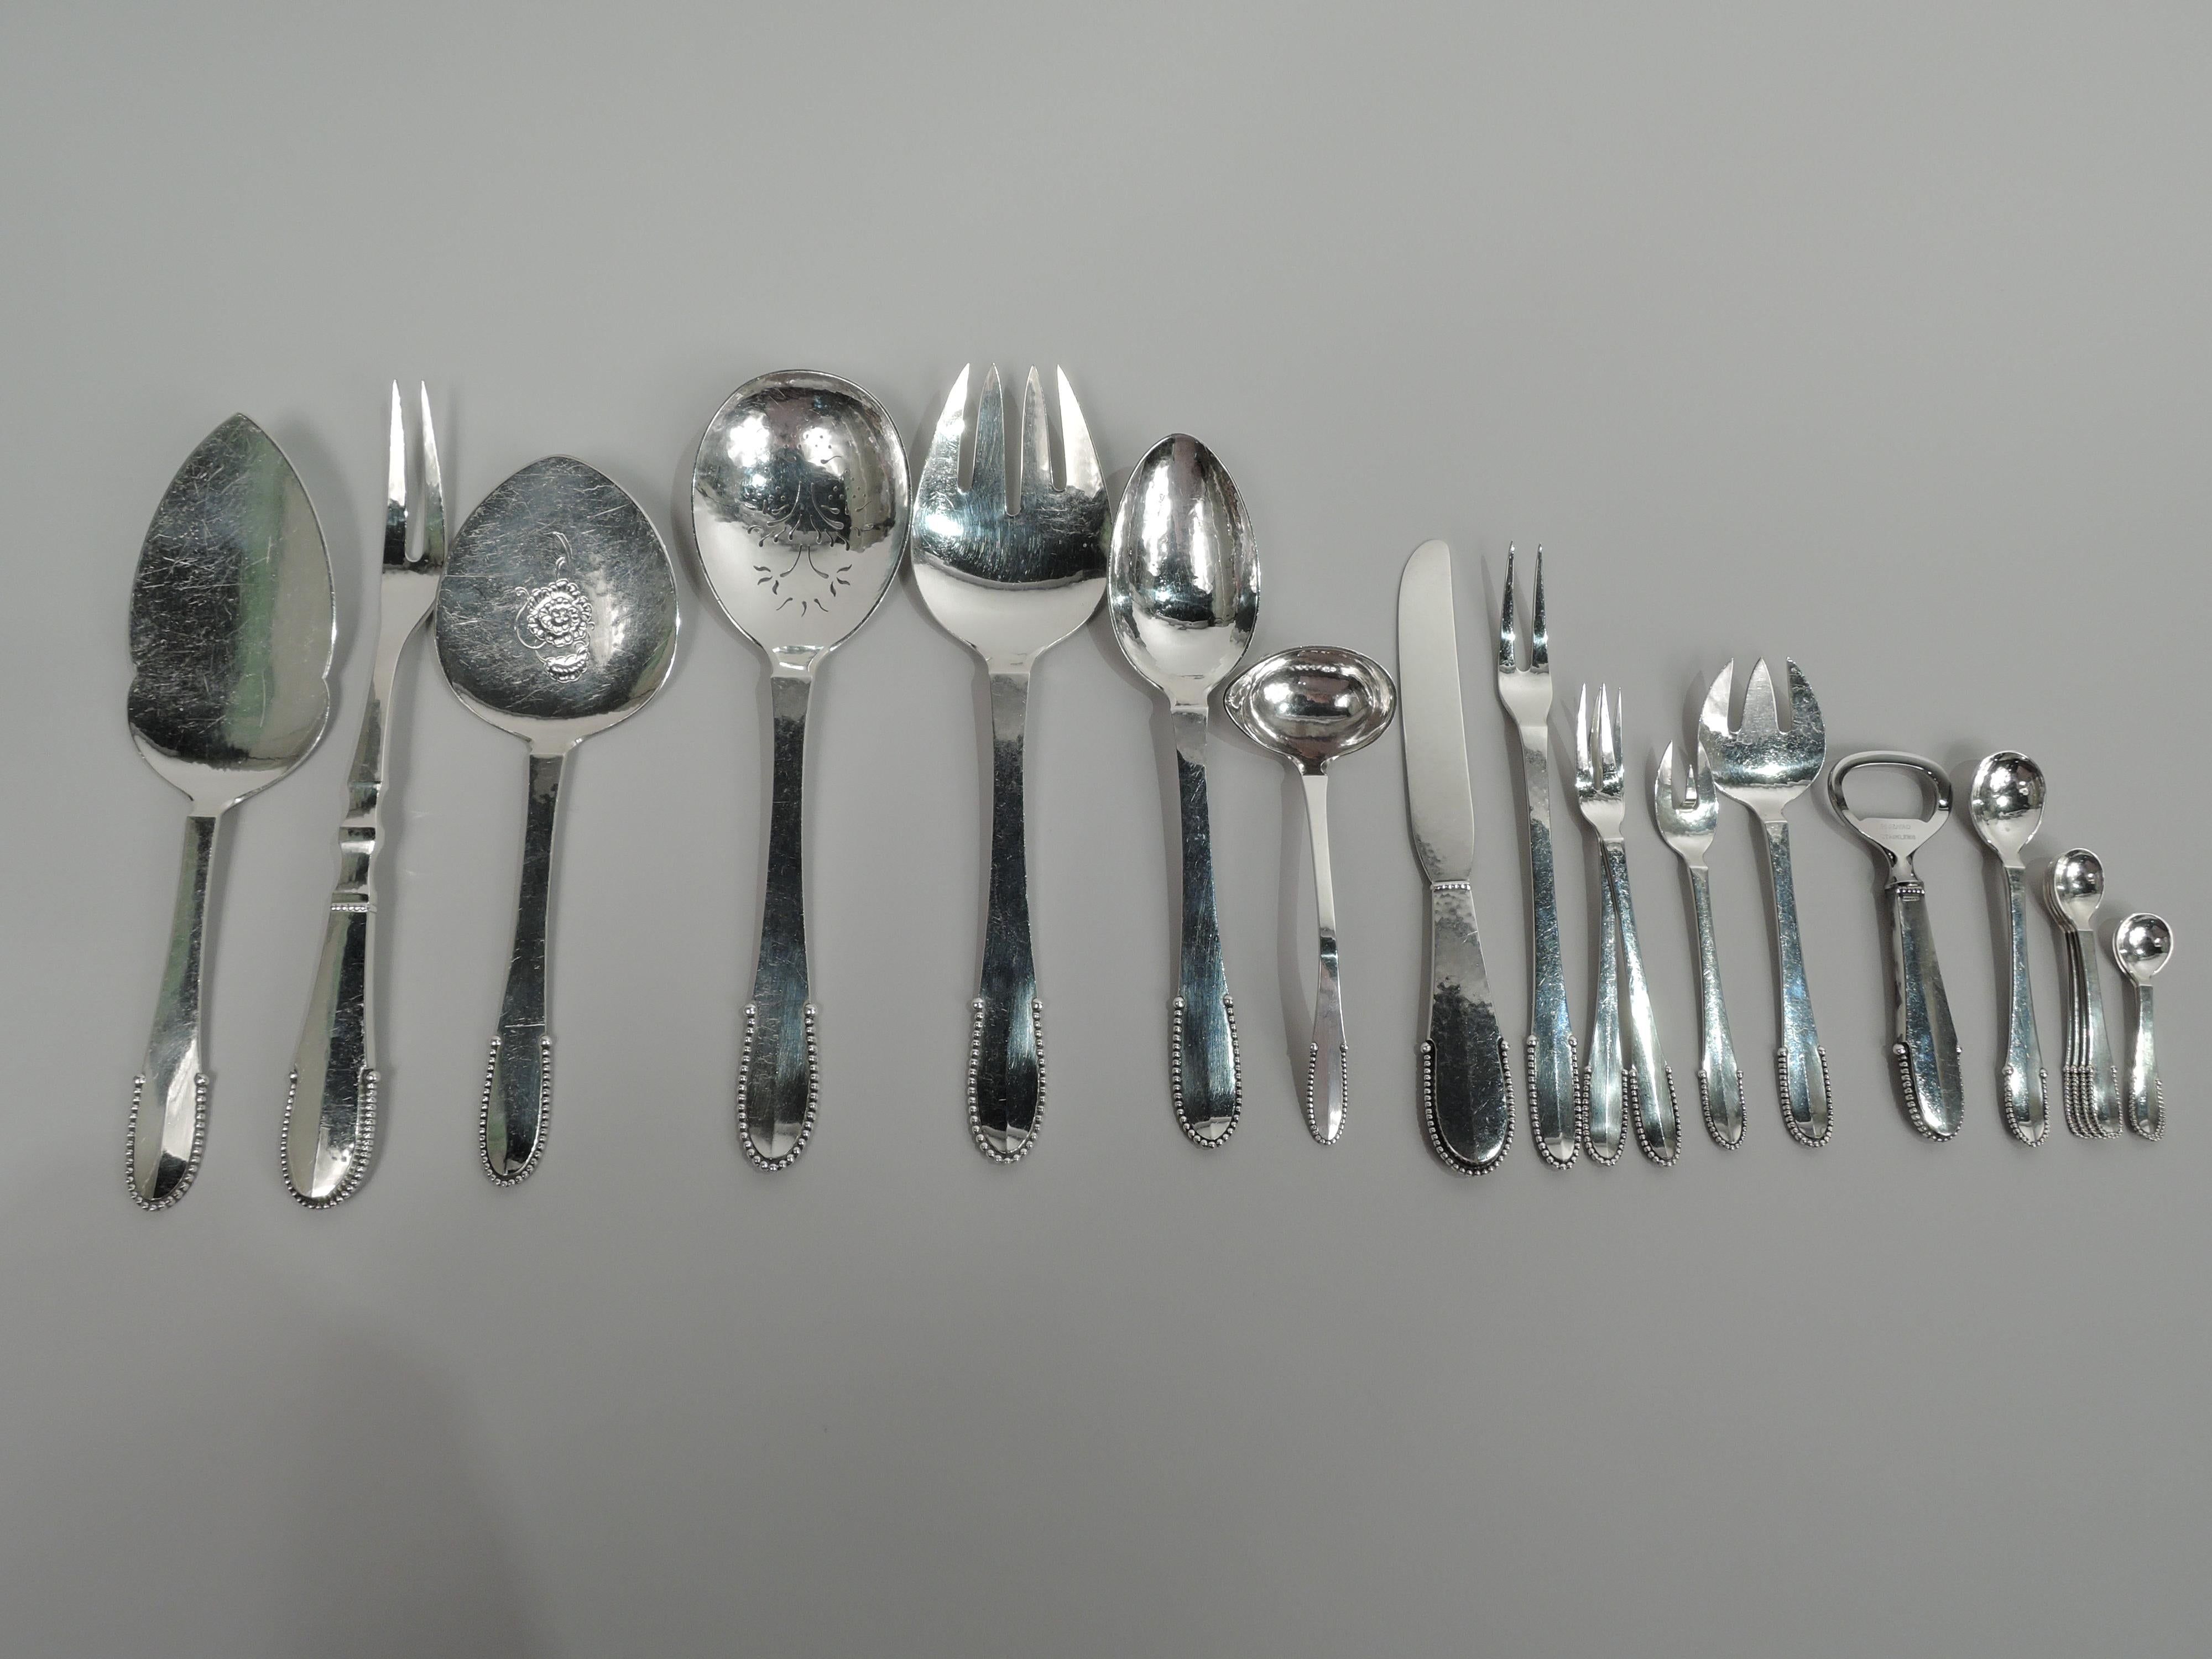 Beaded sterling silver dinner and lunch set. Made by Georg Jensen in Copenhagen.

This set comprises 157 pieces (dimensions in inches): Forks: 12 Dinner forks (7 1/4), 12 luncheon forks (6 7/8), 24 salad forks (6 3/4), 12 pastry forks (5 5/8), 2